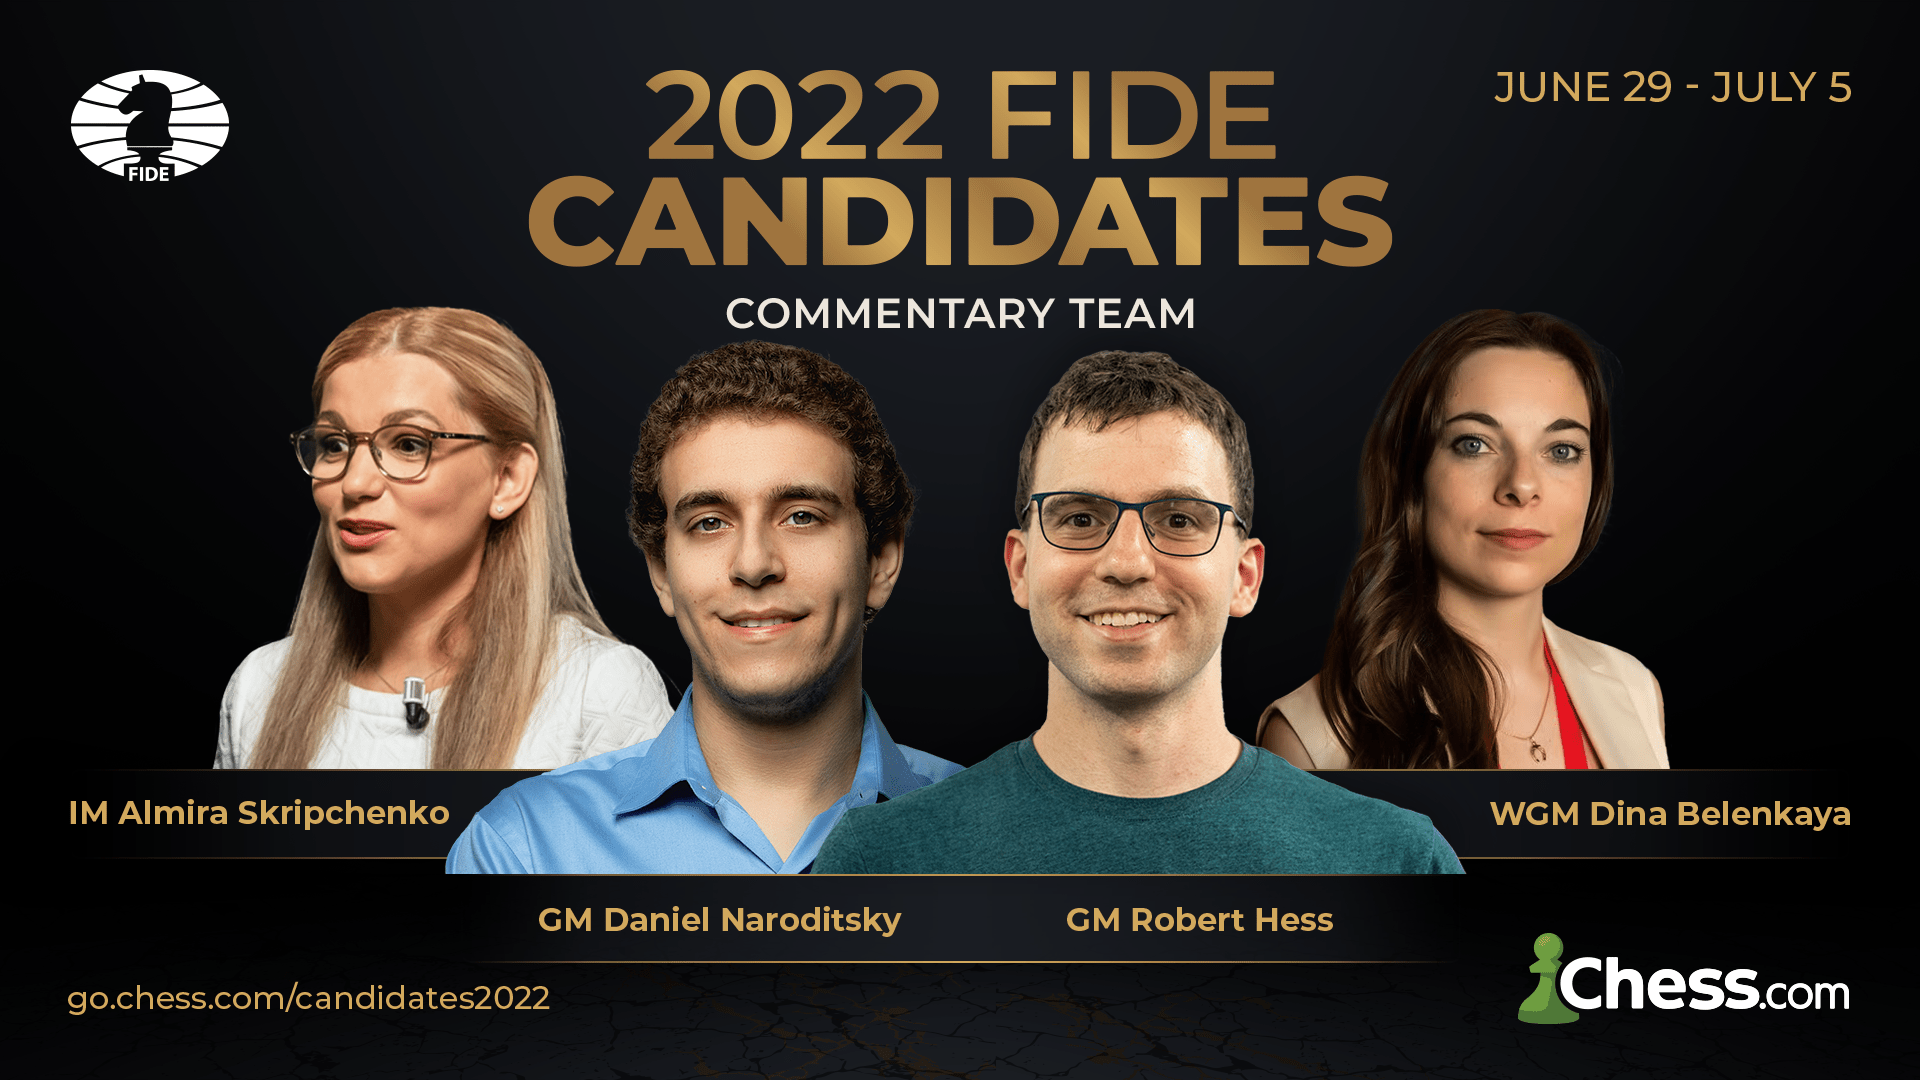 2022 FIDE Candidates Chess.com commentary team